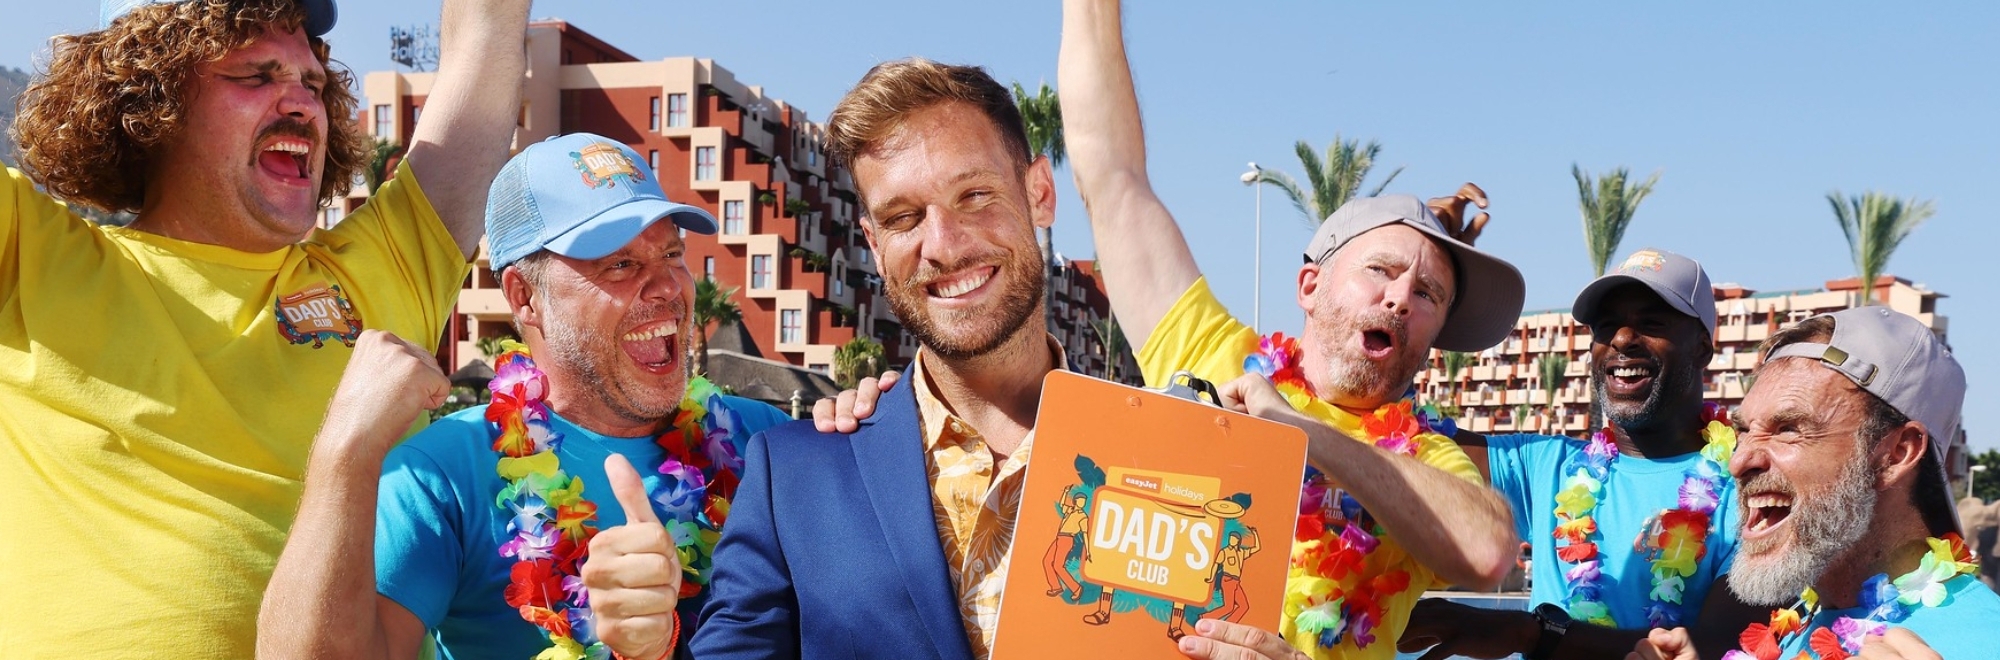 easyJet Holidays launch the world’s first in-hotel ‘Dad’s Club’